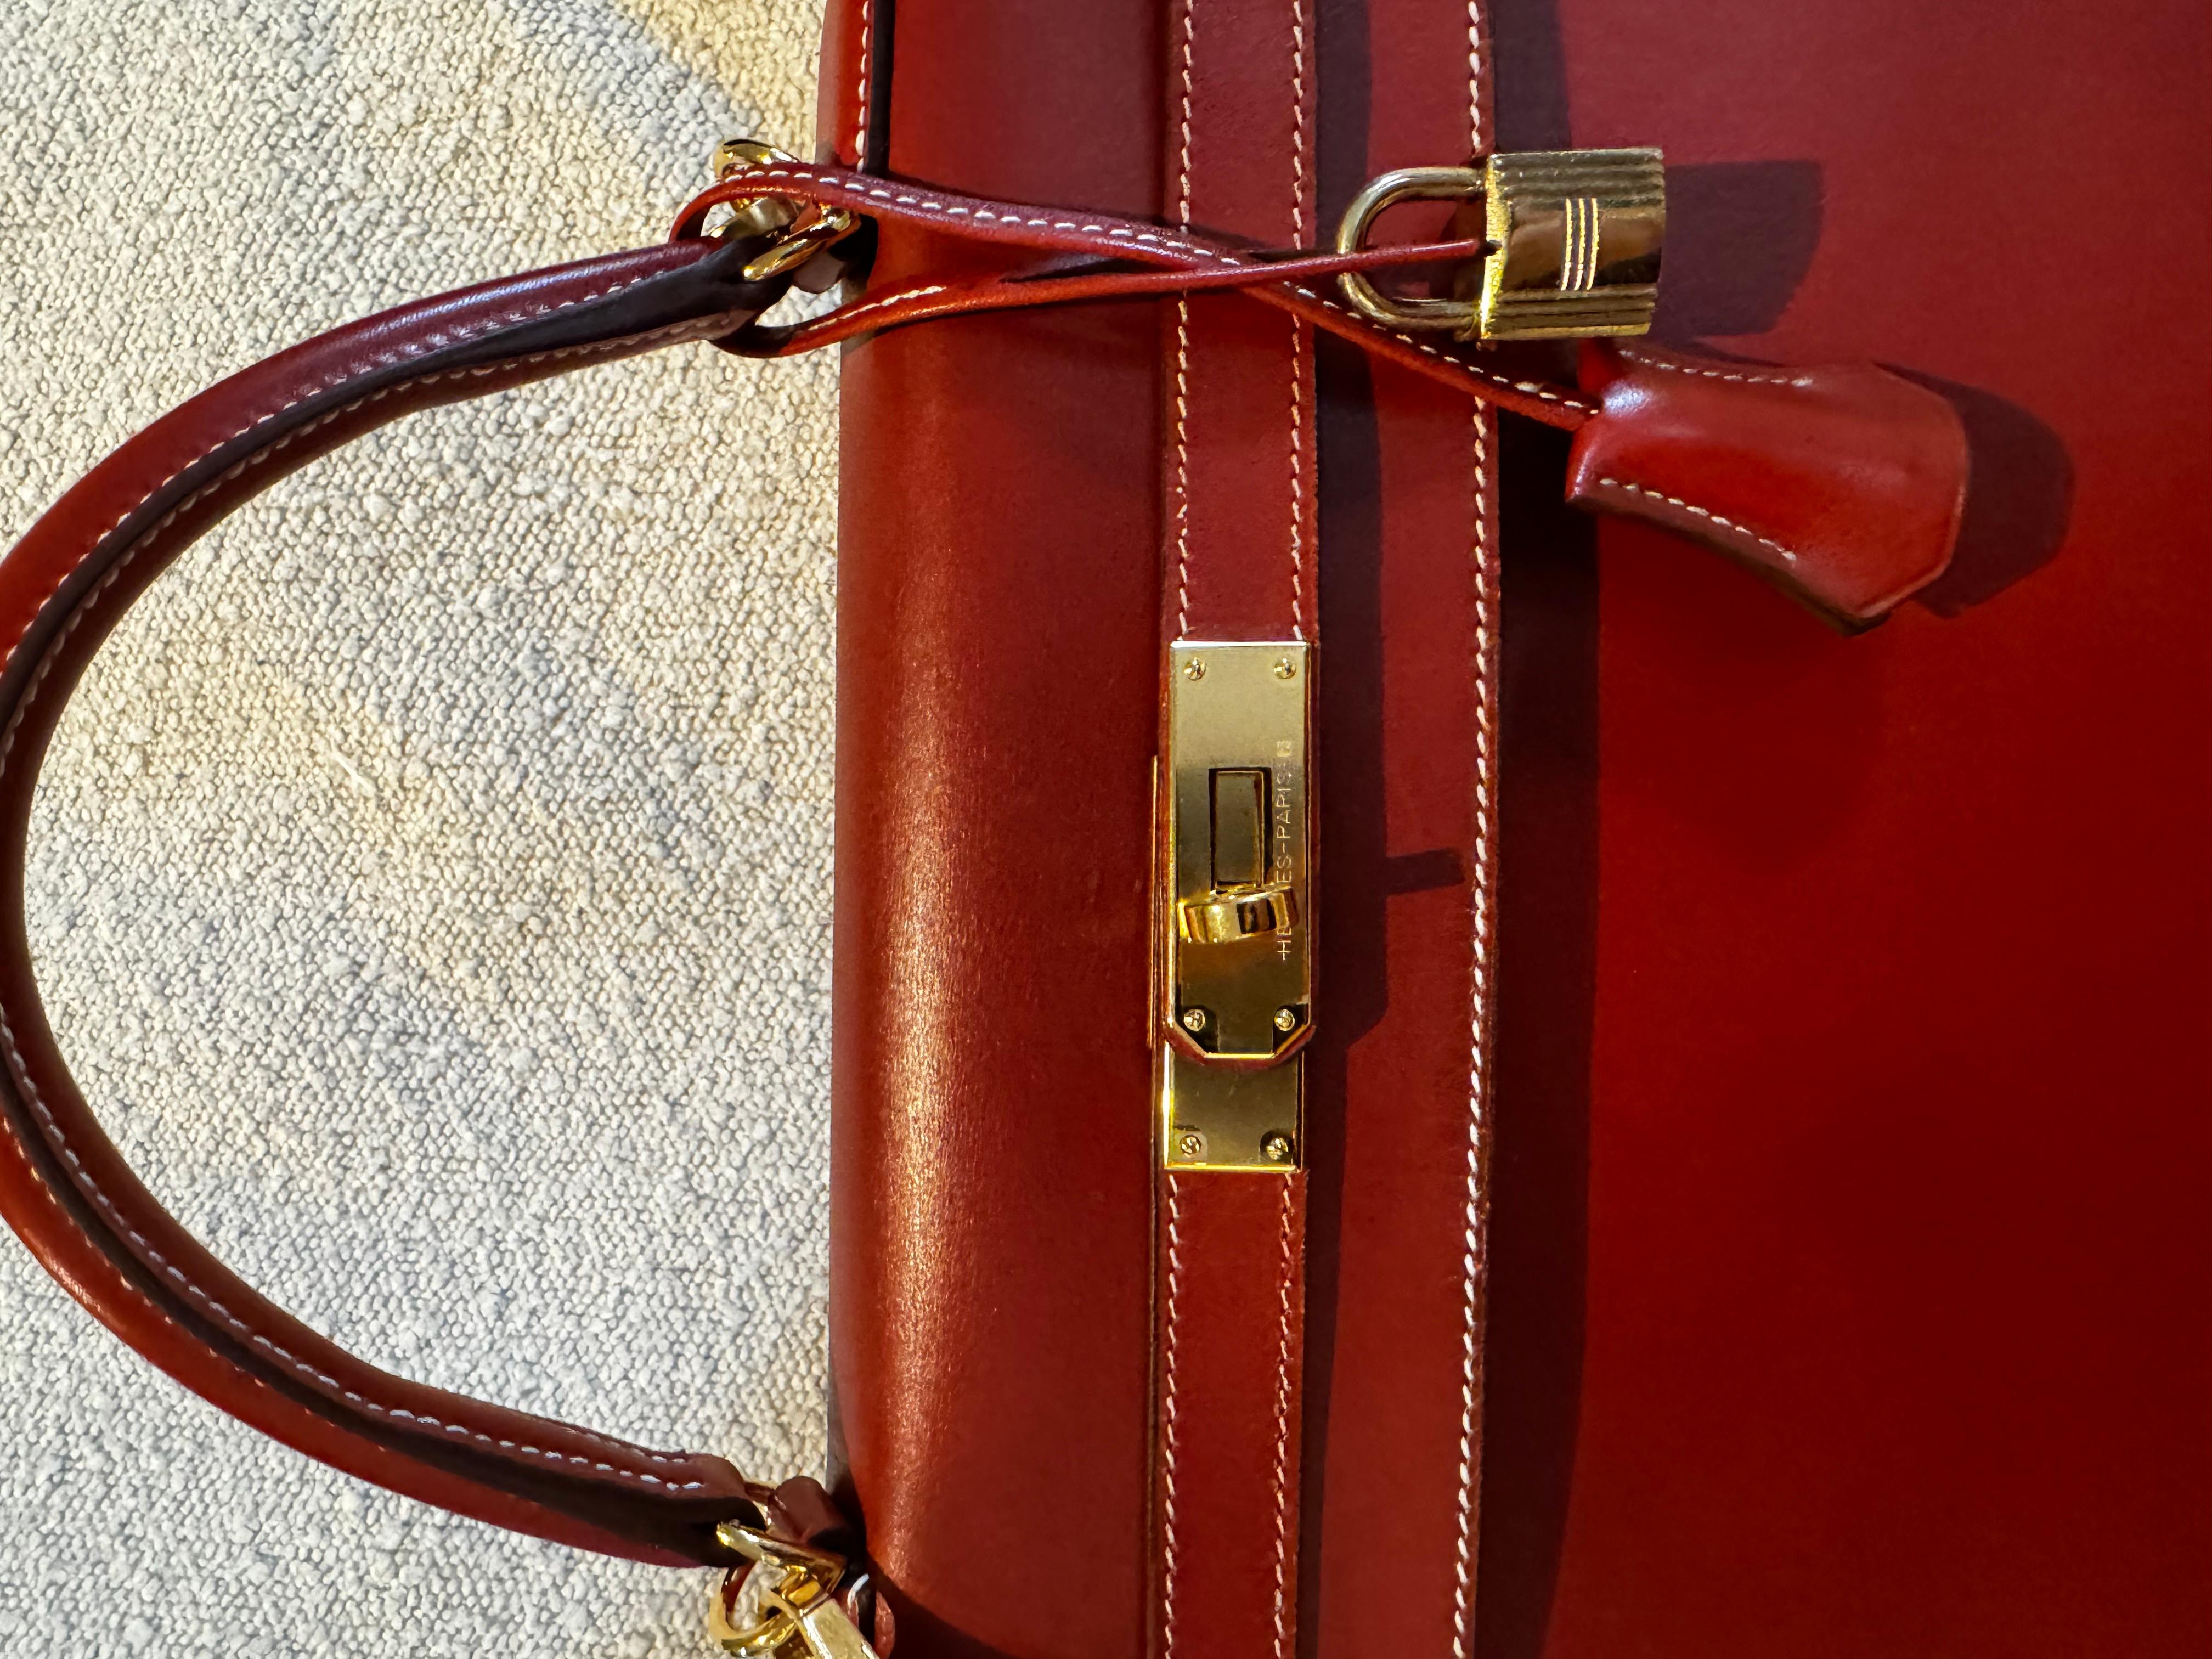 Hermes Kelly 32 sellier vintage in burgundy box leather with gold hardware. Recently relaunched colour and leather combo, very popular and desirable. With new hardware and new handle, just out of the Hermes repair service. 
Comes with its shoulder